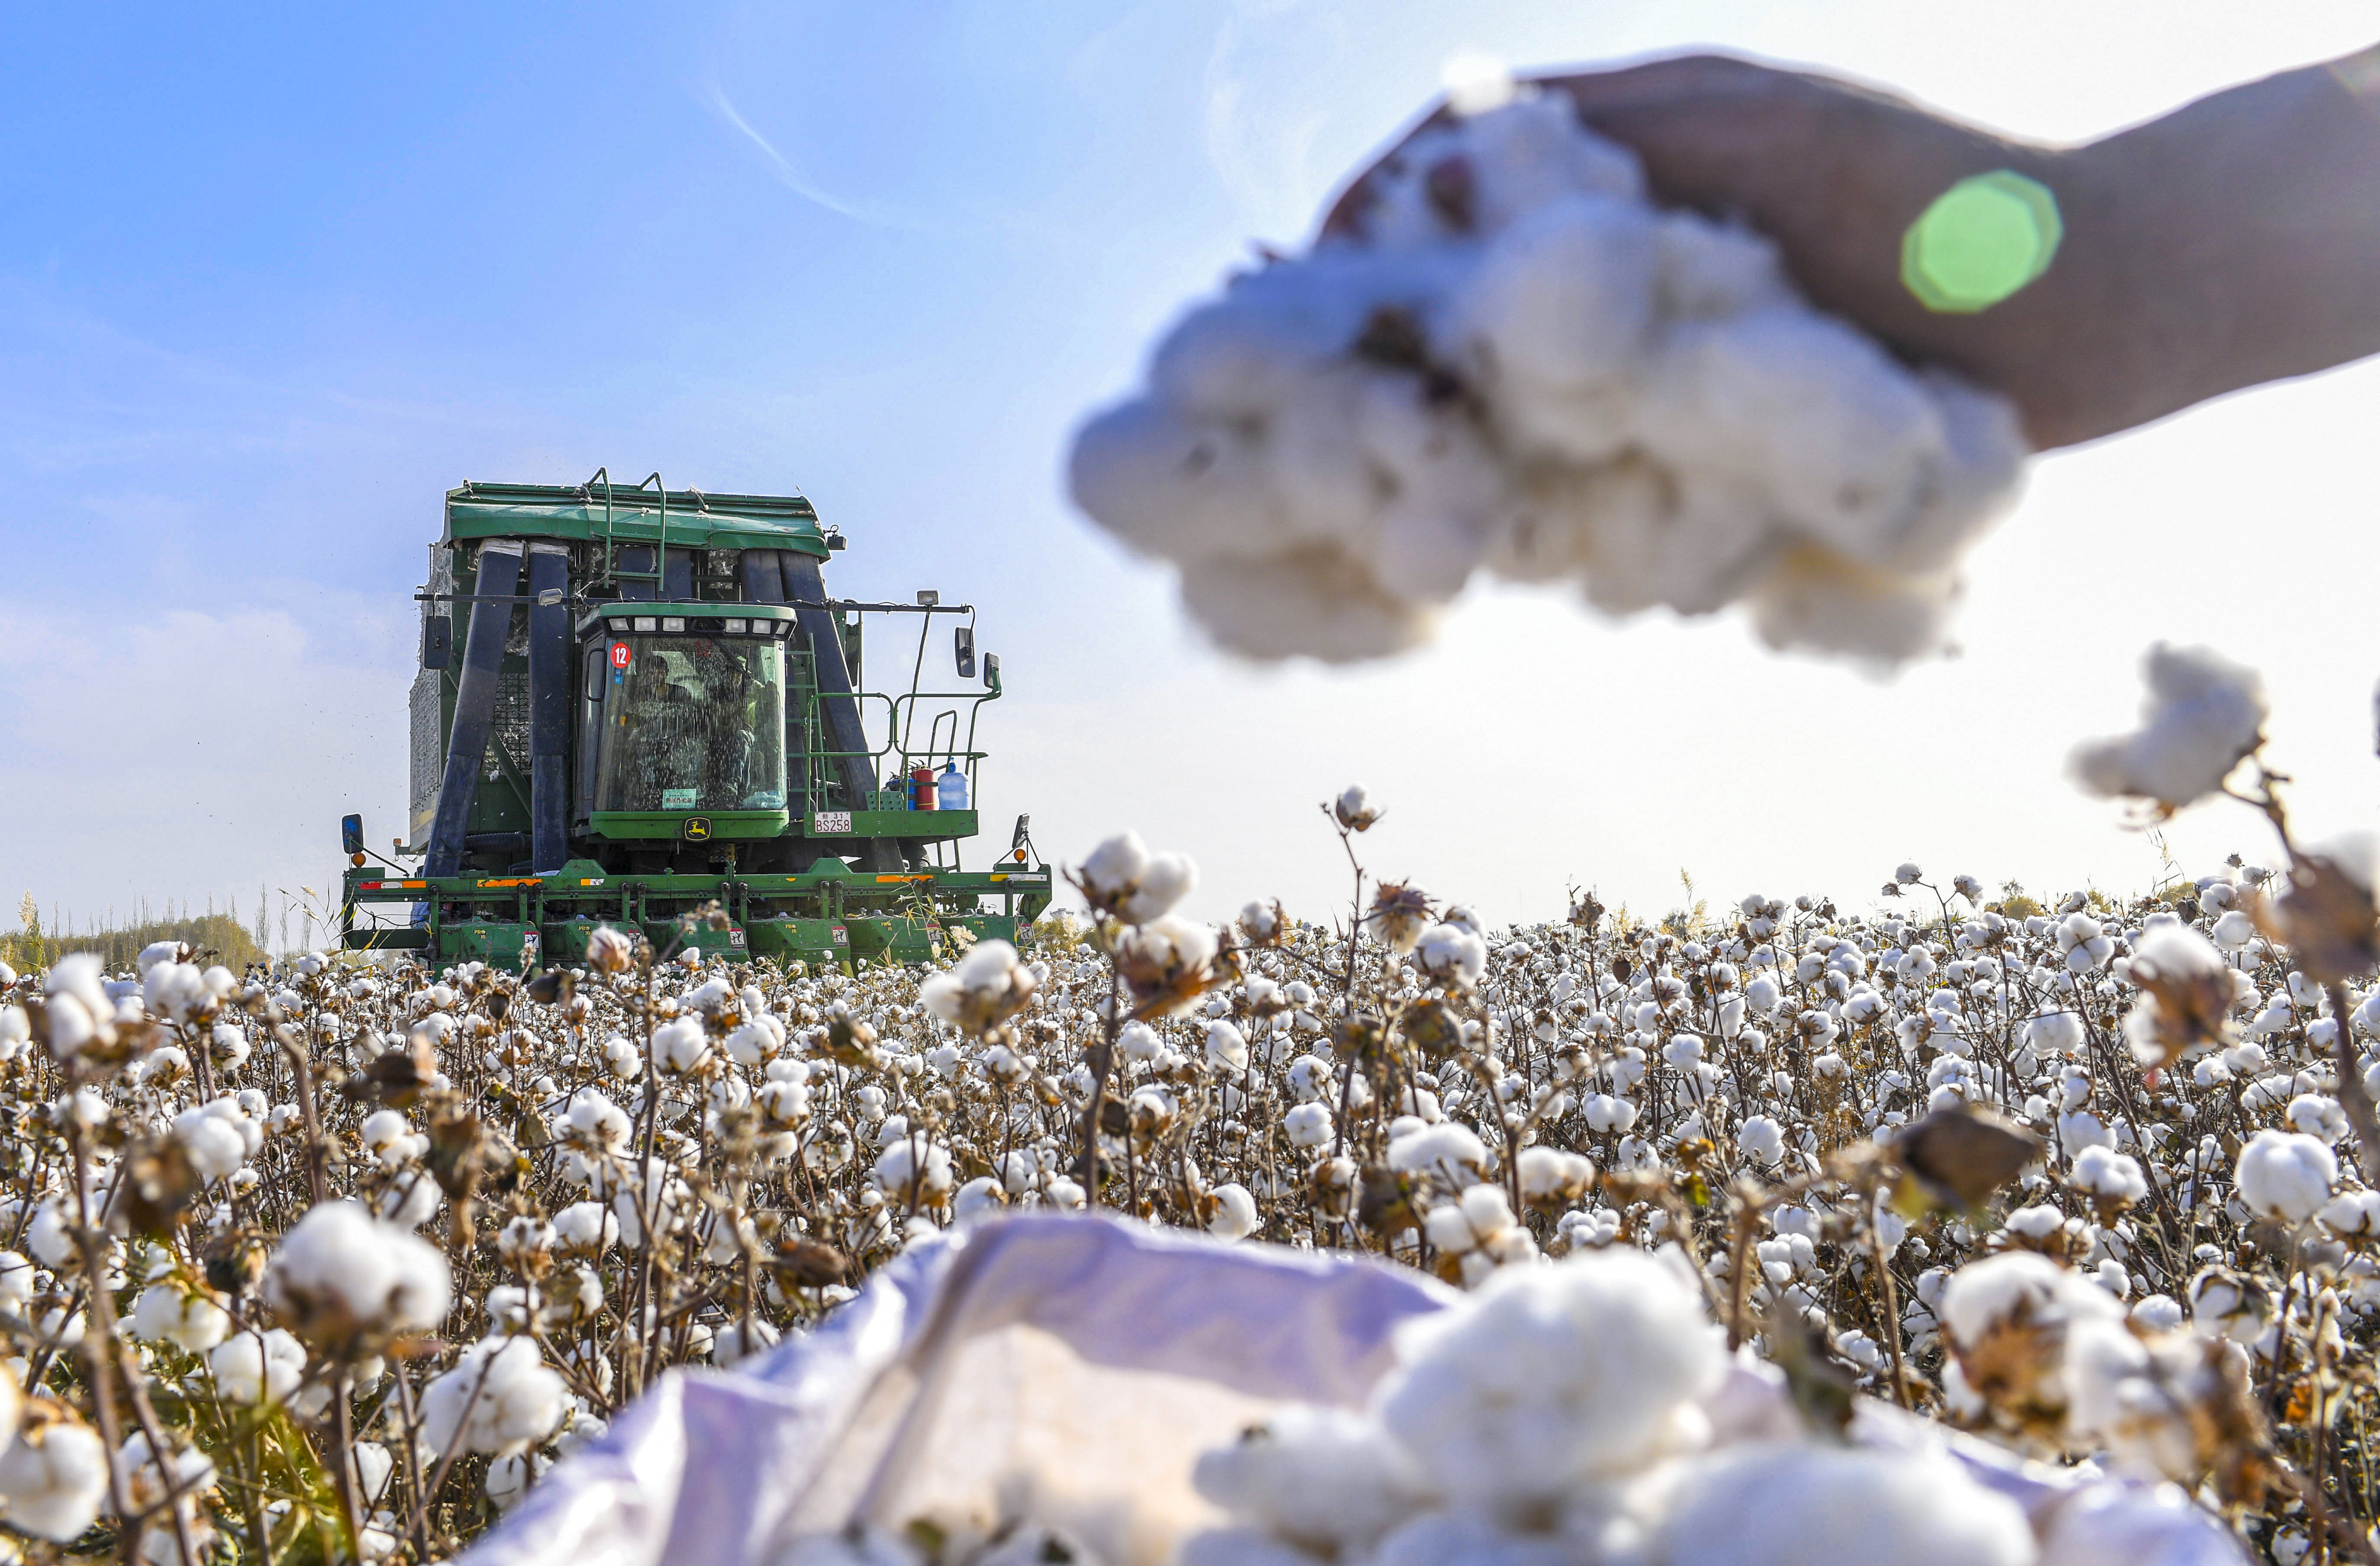 Xinjiang cotton dispute - latest news and updates | South China Morning ...